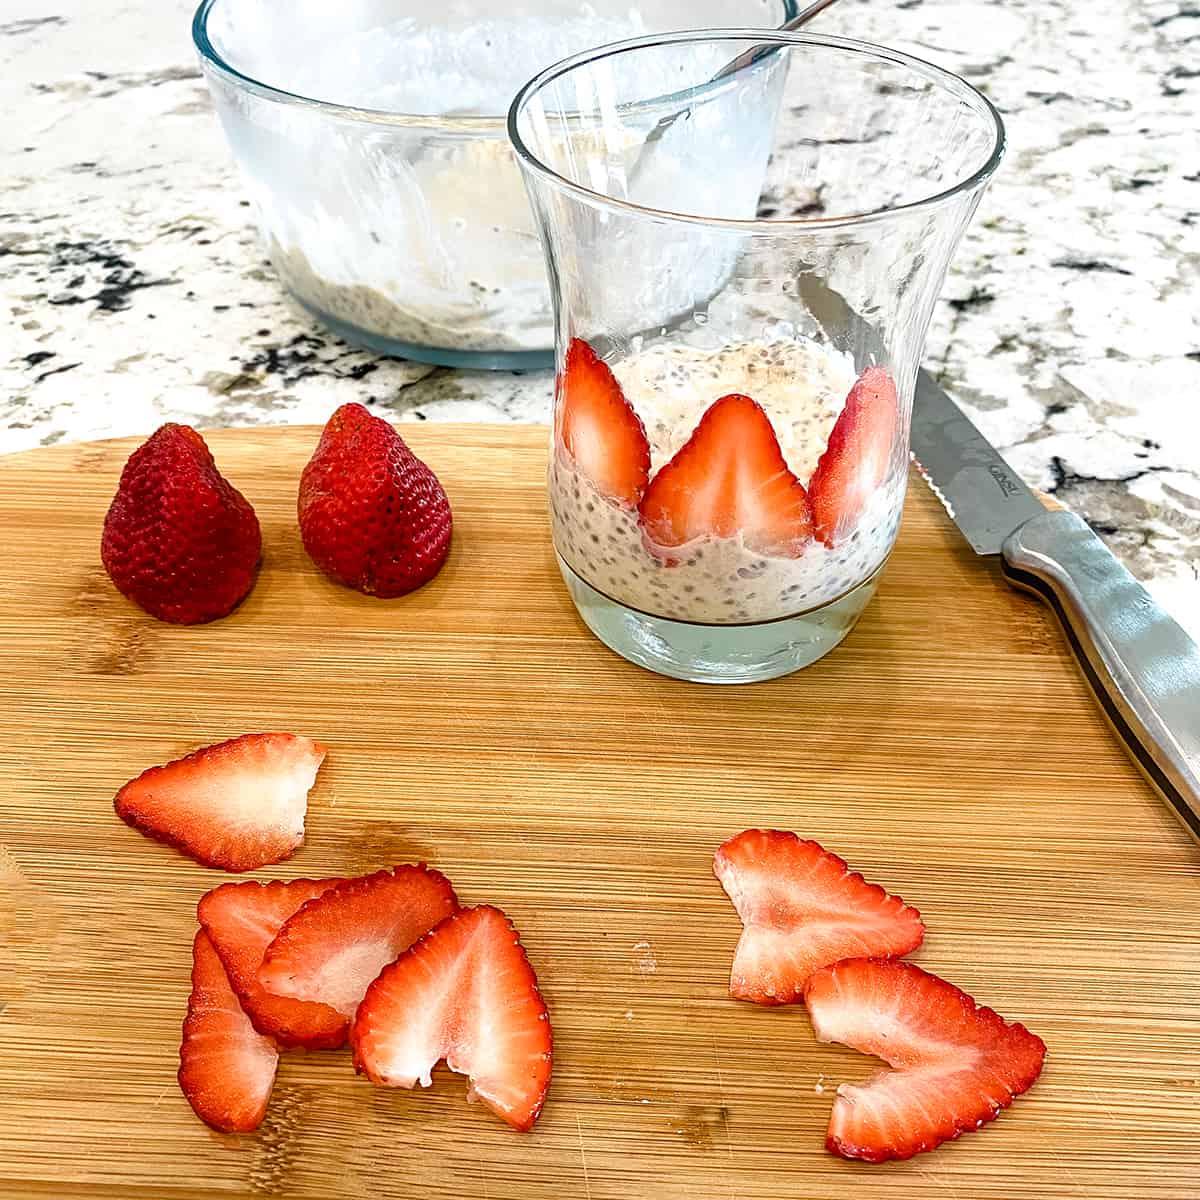 Thinly sliced strawberries are on a cutting board. A clear glass has a layer of oatmeal and slices of strawberries are creating a layer of lovely fruit.